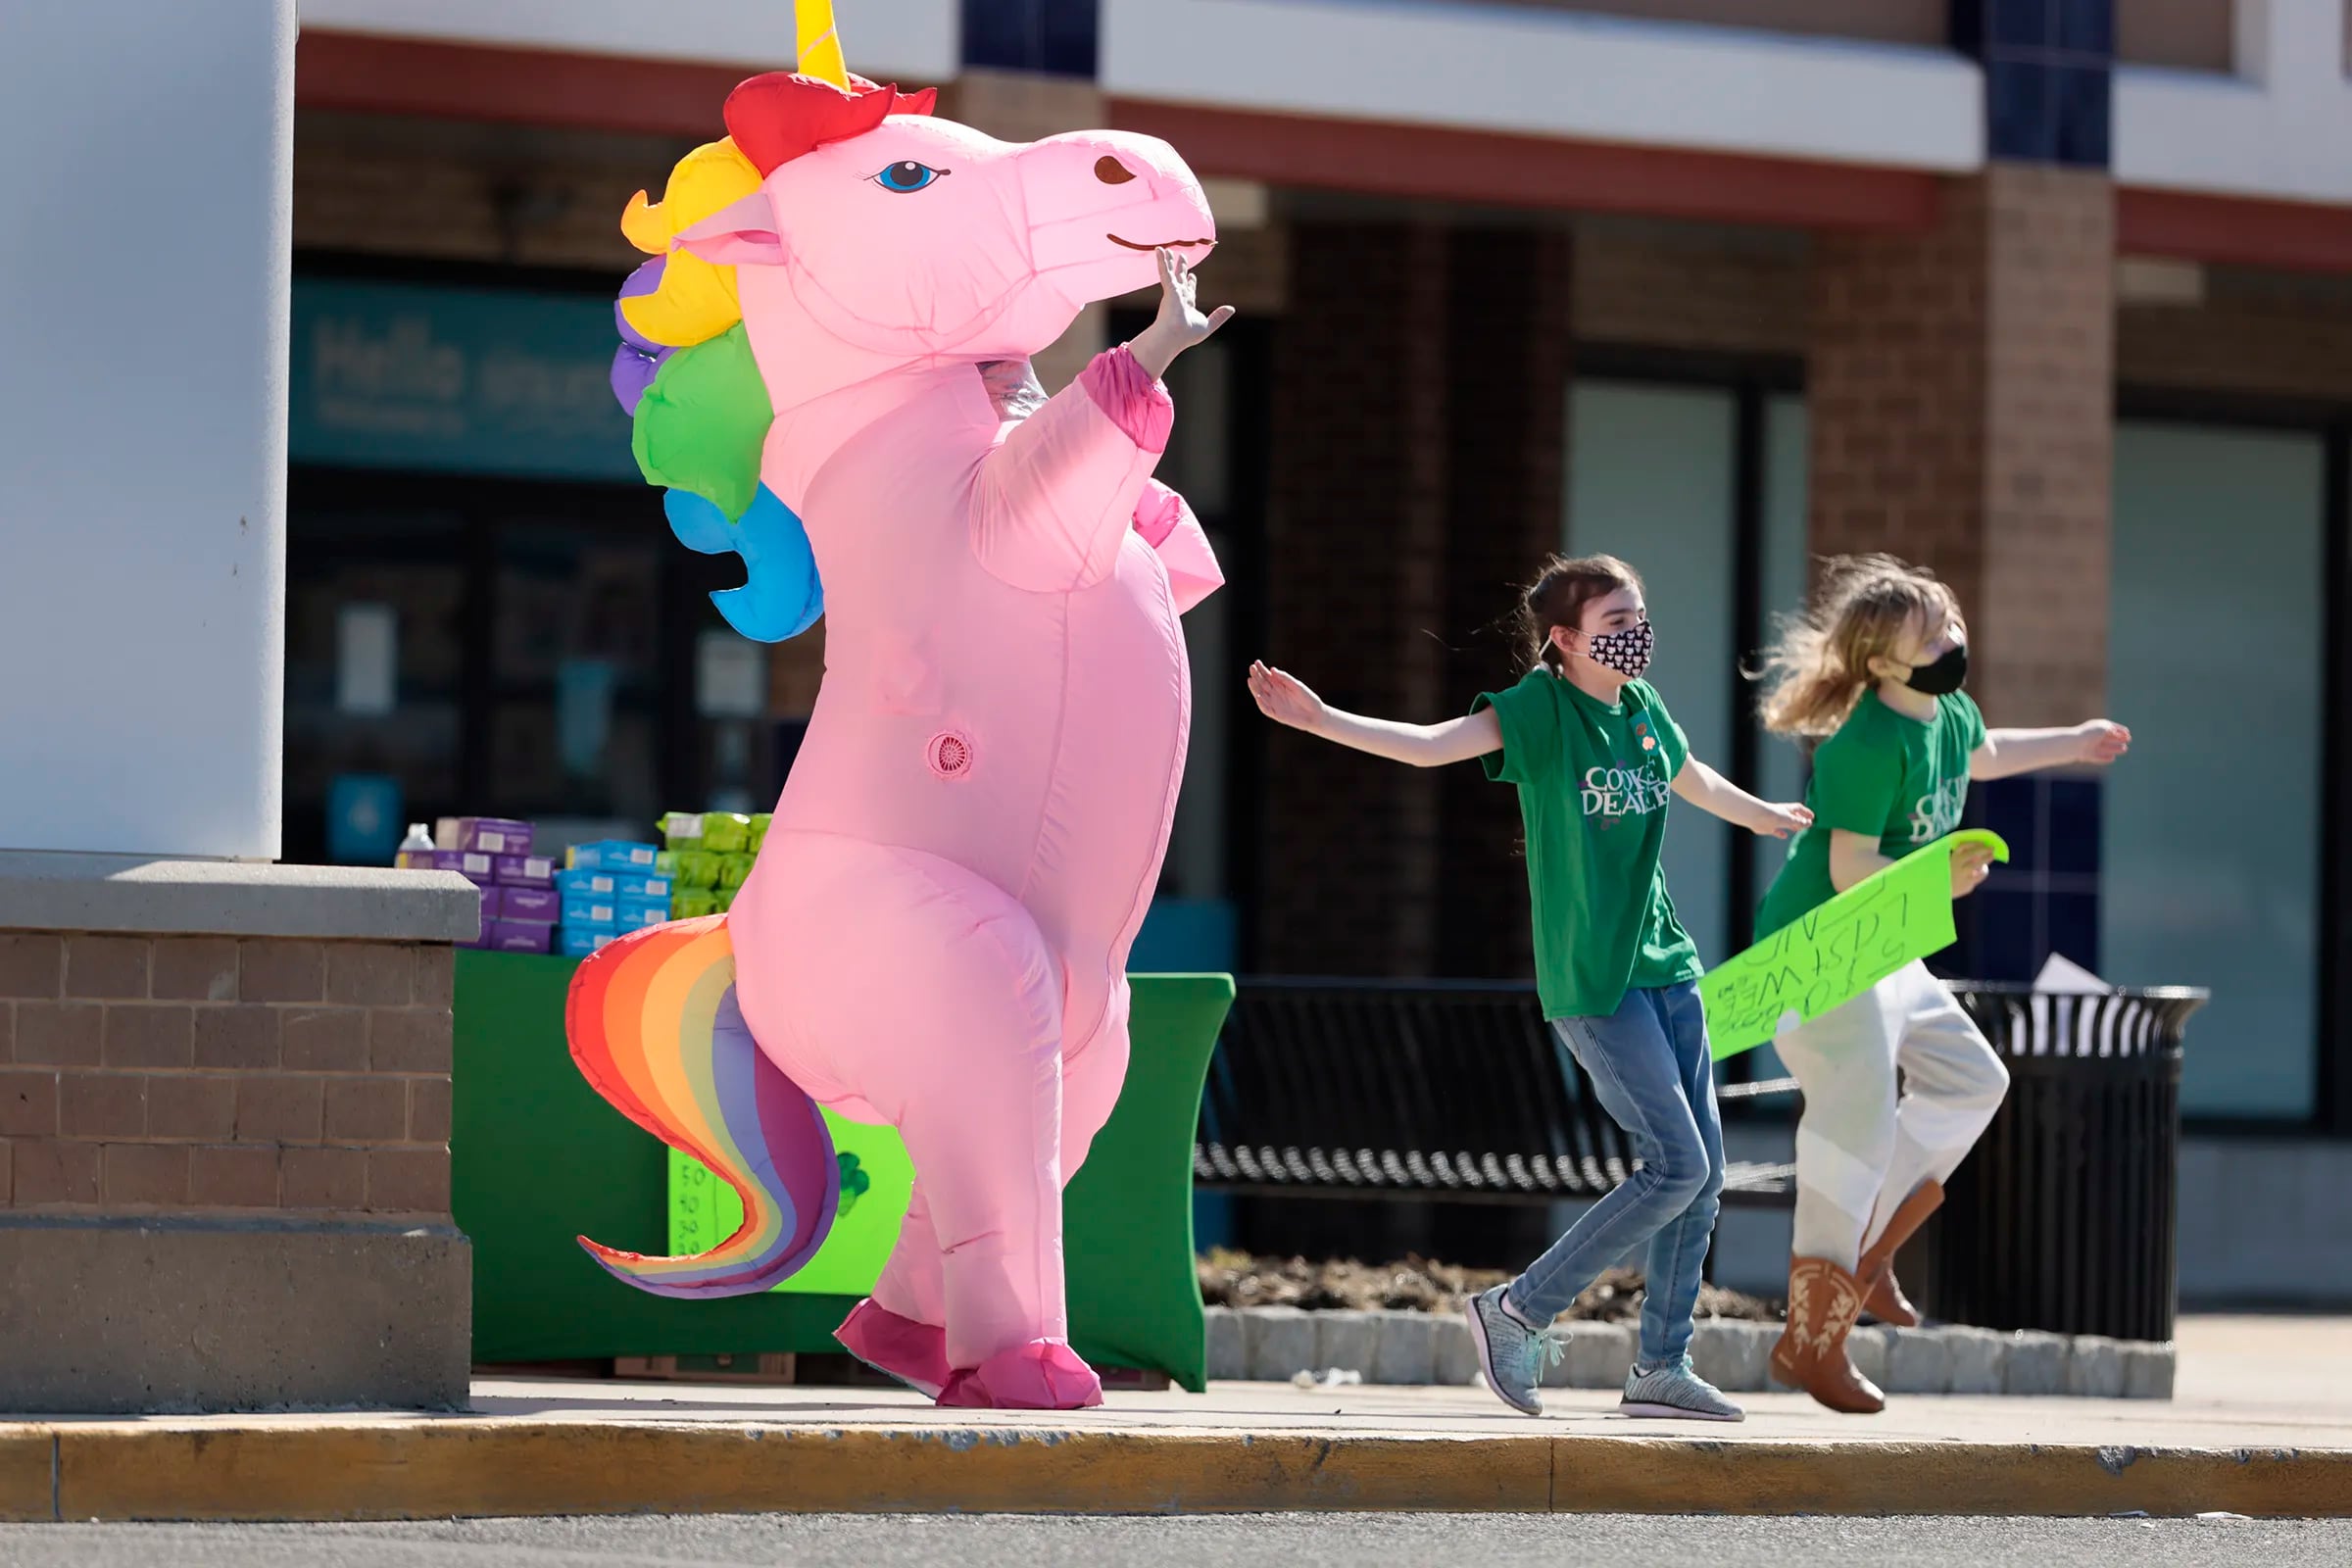 Shannon Pelosi put on an unicorn costume while her daughter Charlotte Pelosi, (middle) and Corinne McAdams danced to drum up more cookie sales at the Westmont Plaza shopping center in 2021.